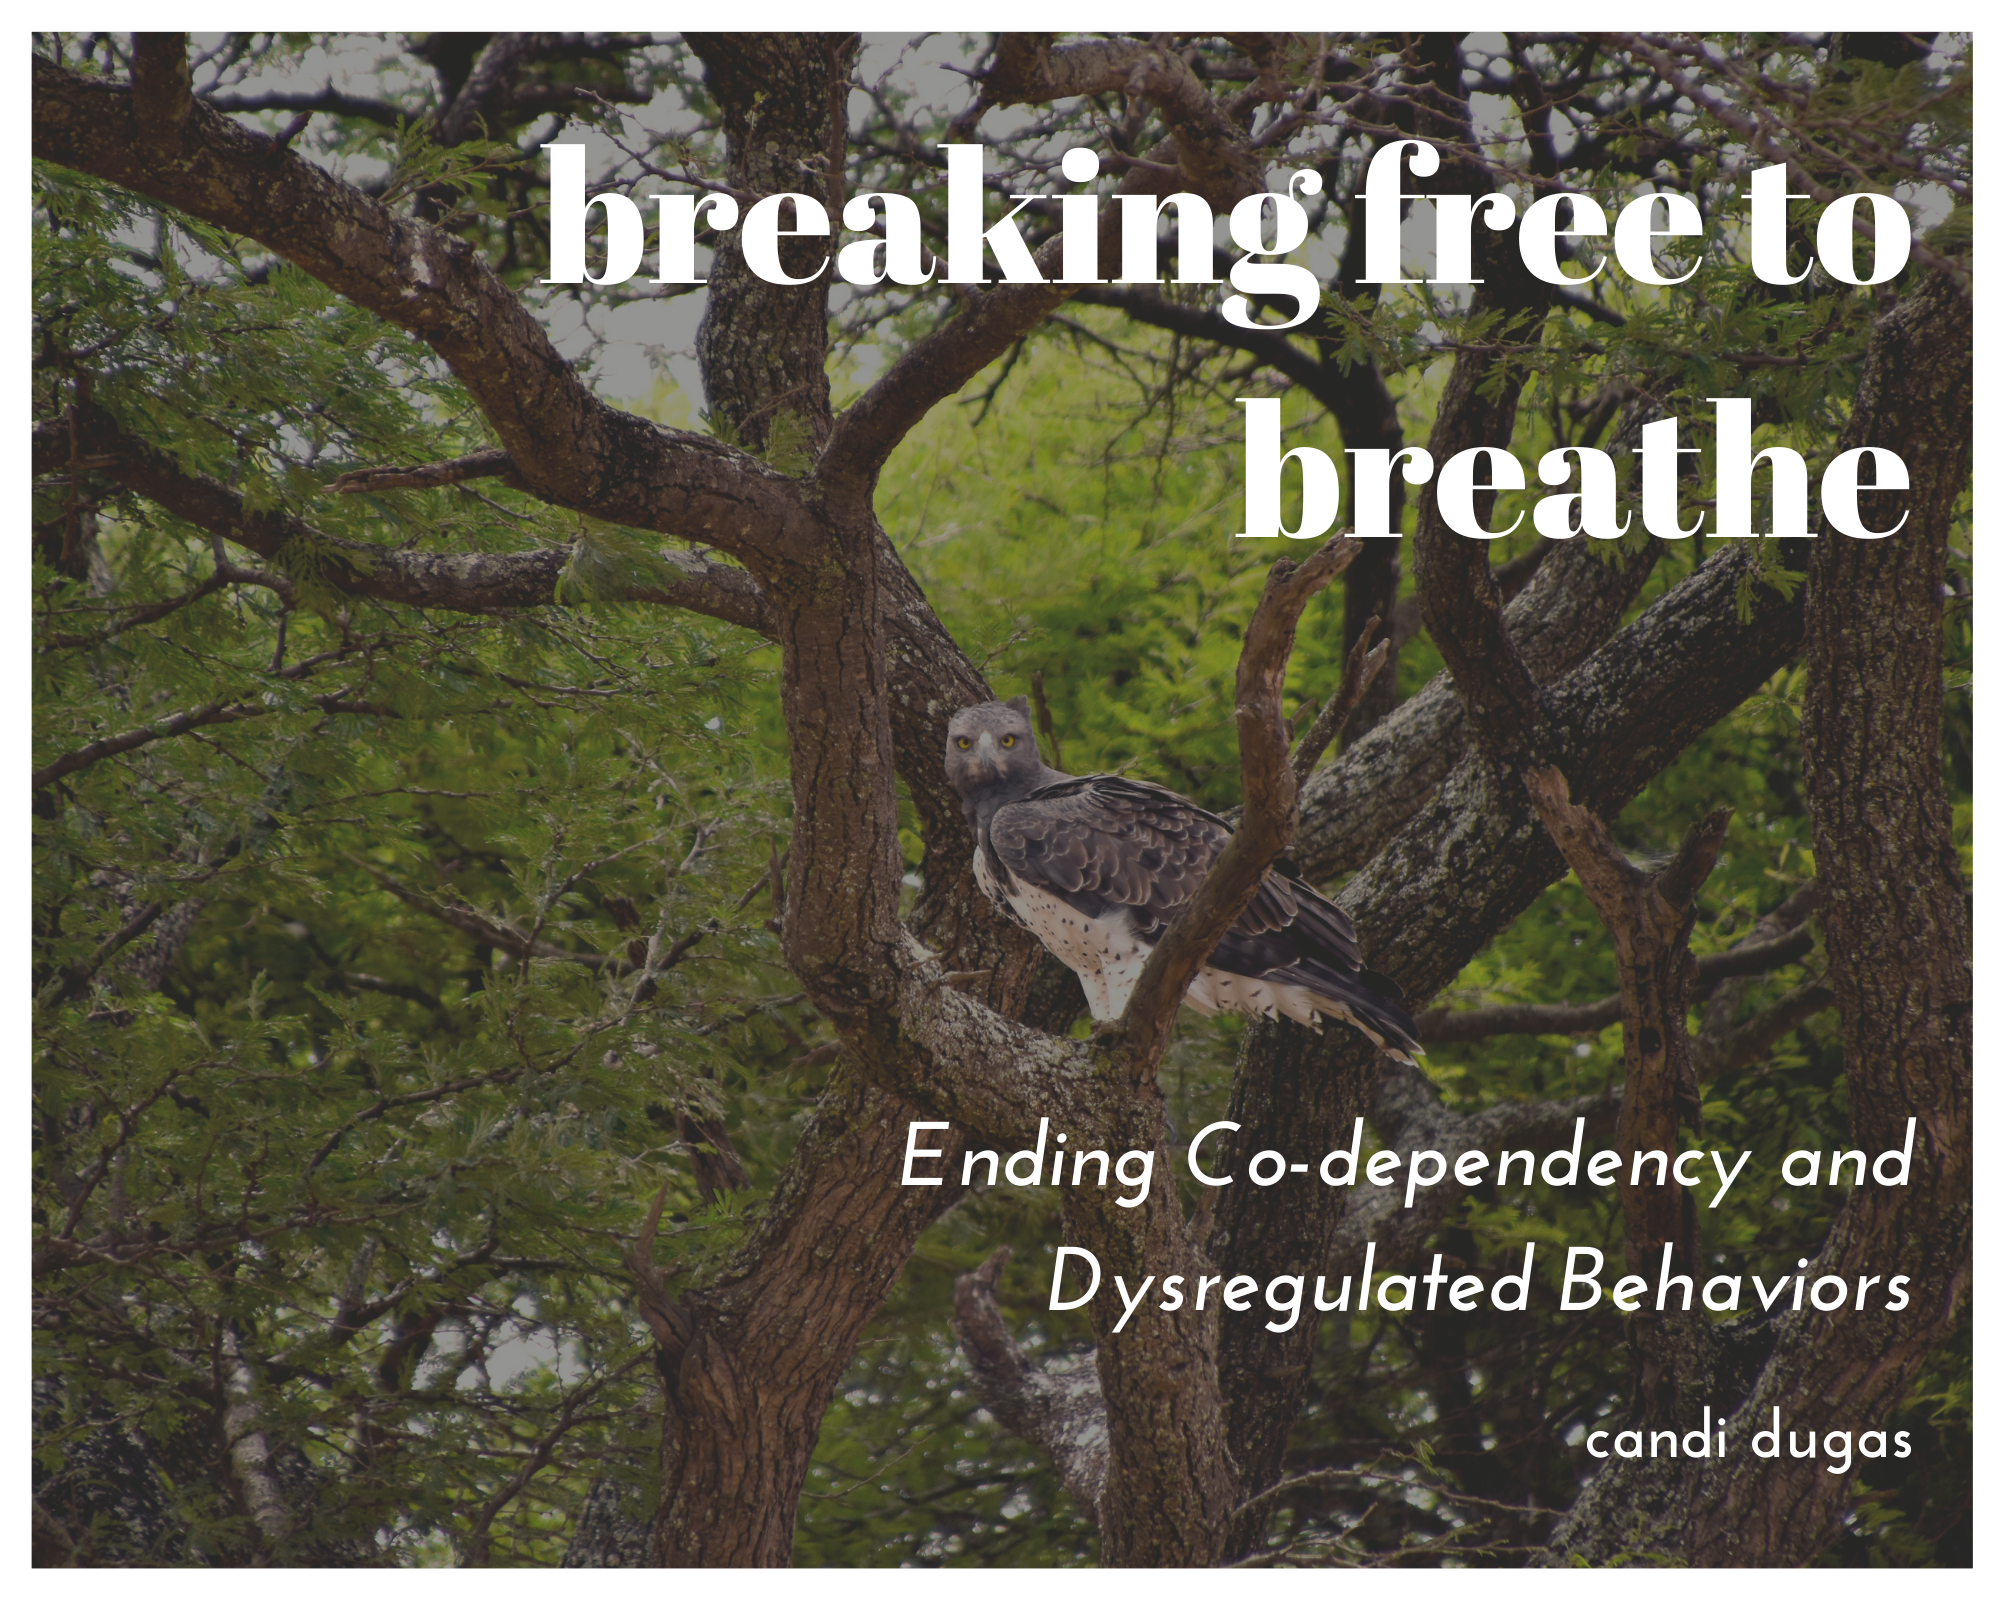 resources for codependence and dysregulated behavior